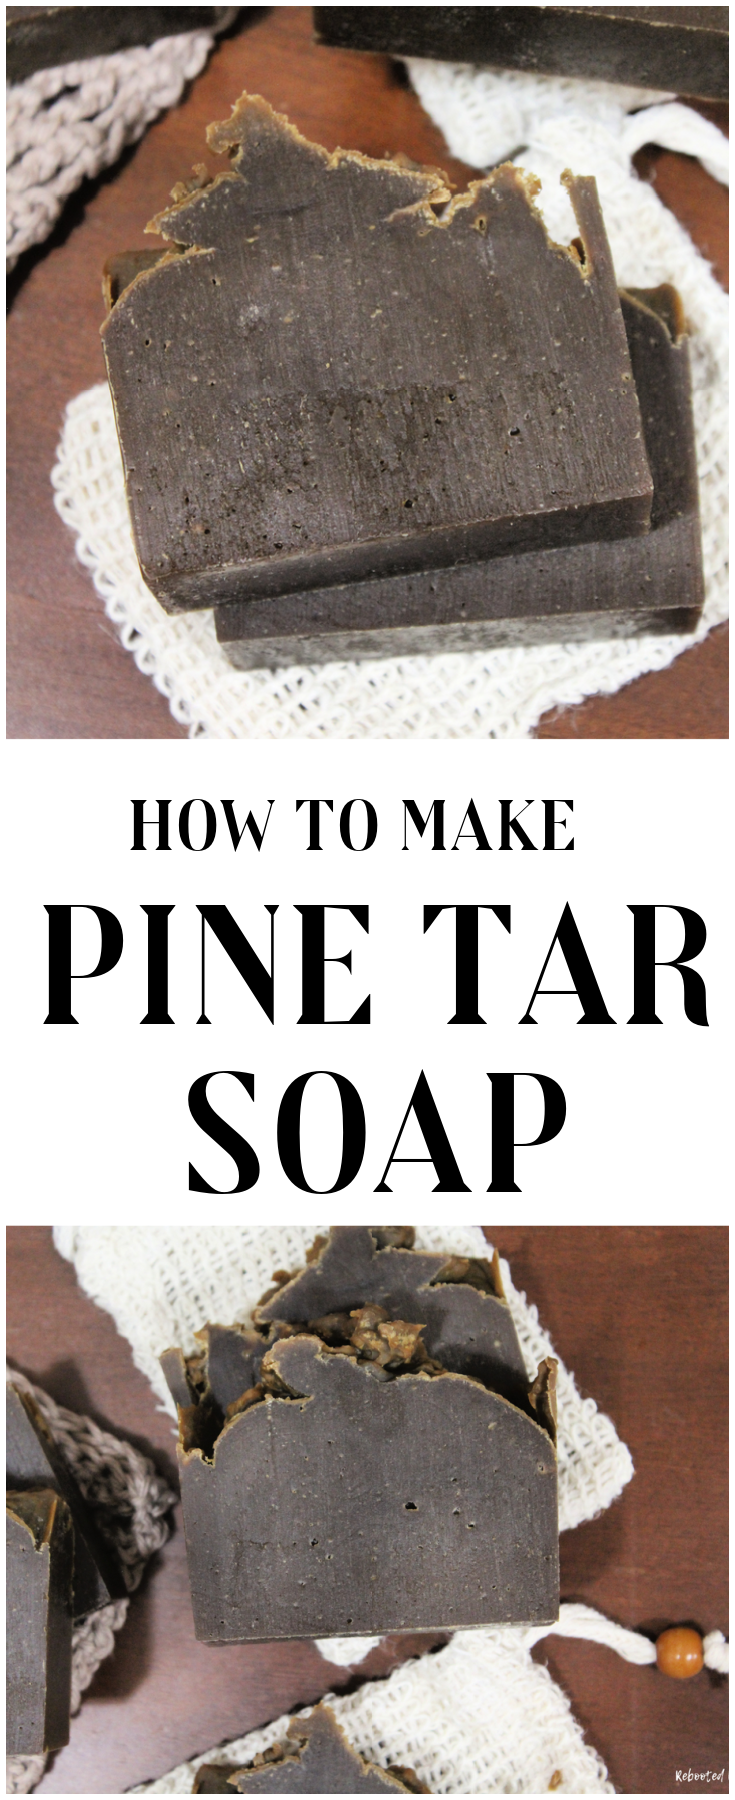 Pine Tar Soap made with Lard - this soap is great for supporting dry, problem skin and conditions such as eczema, psoriasis, dryness and other minor skin irritations.